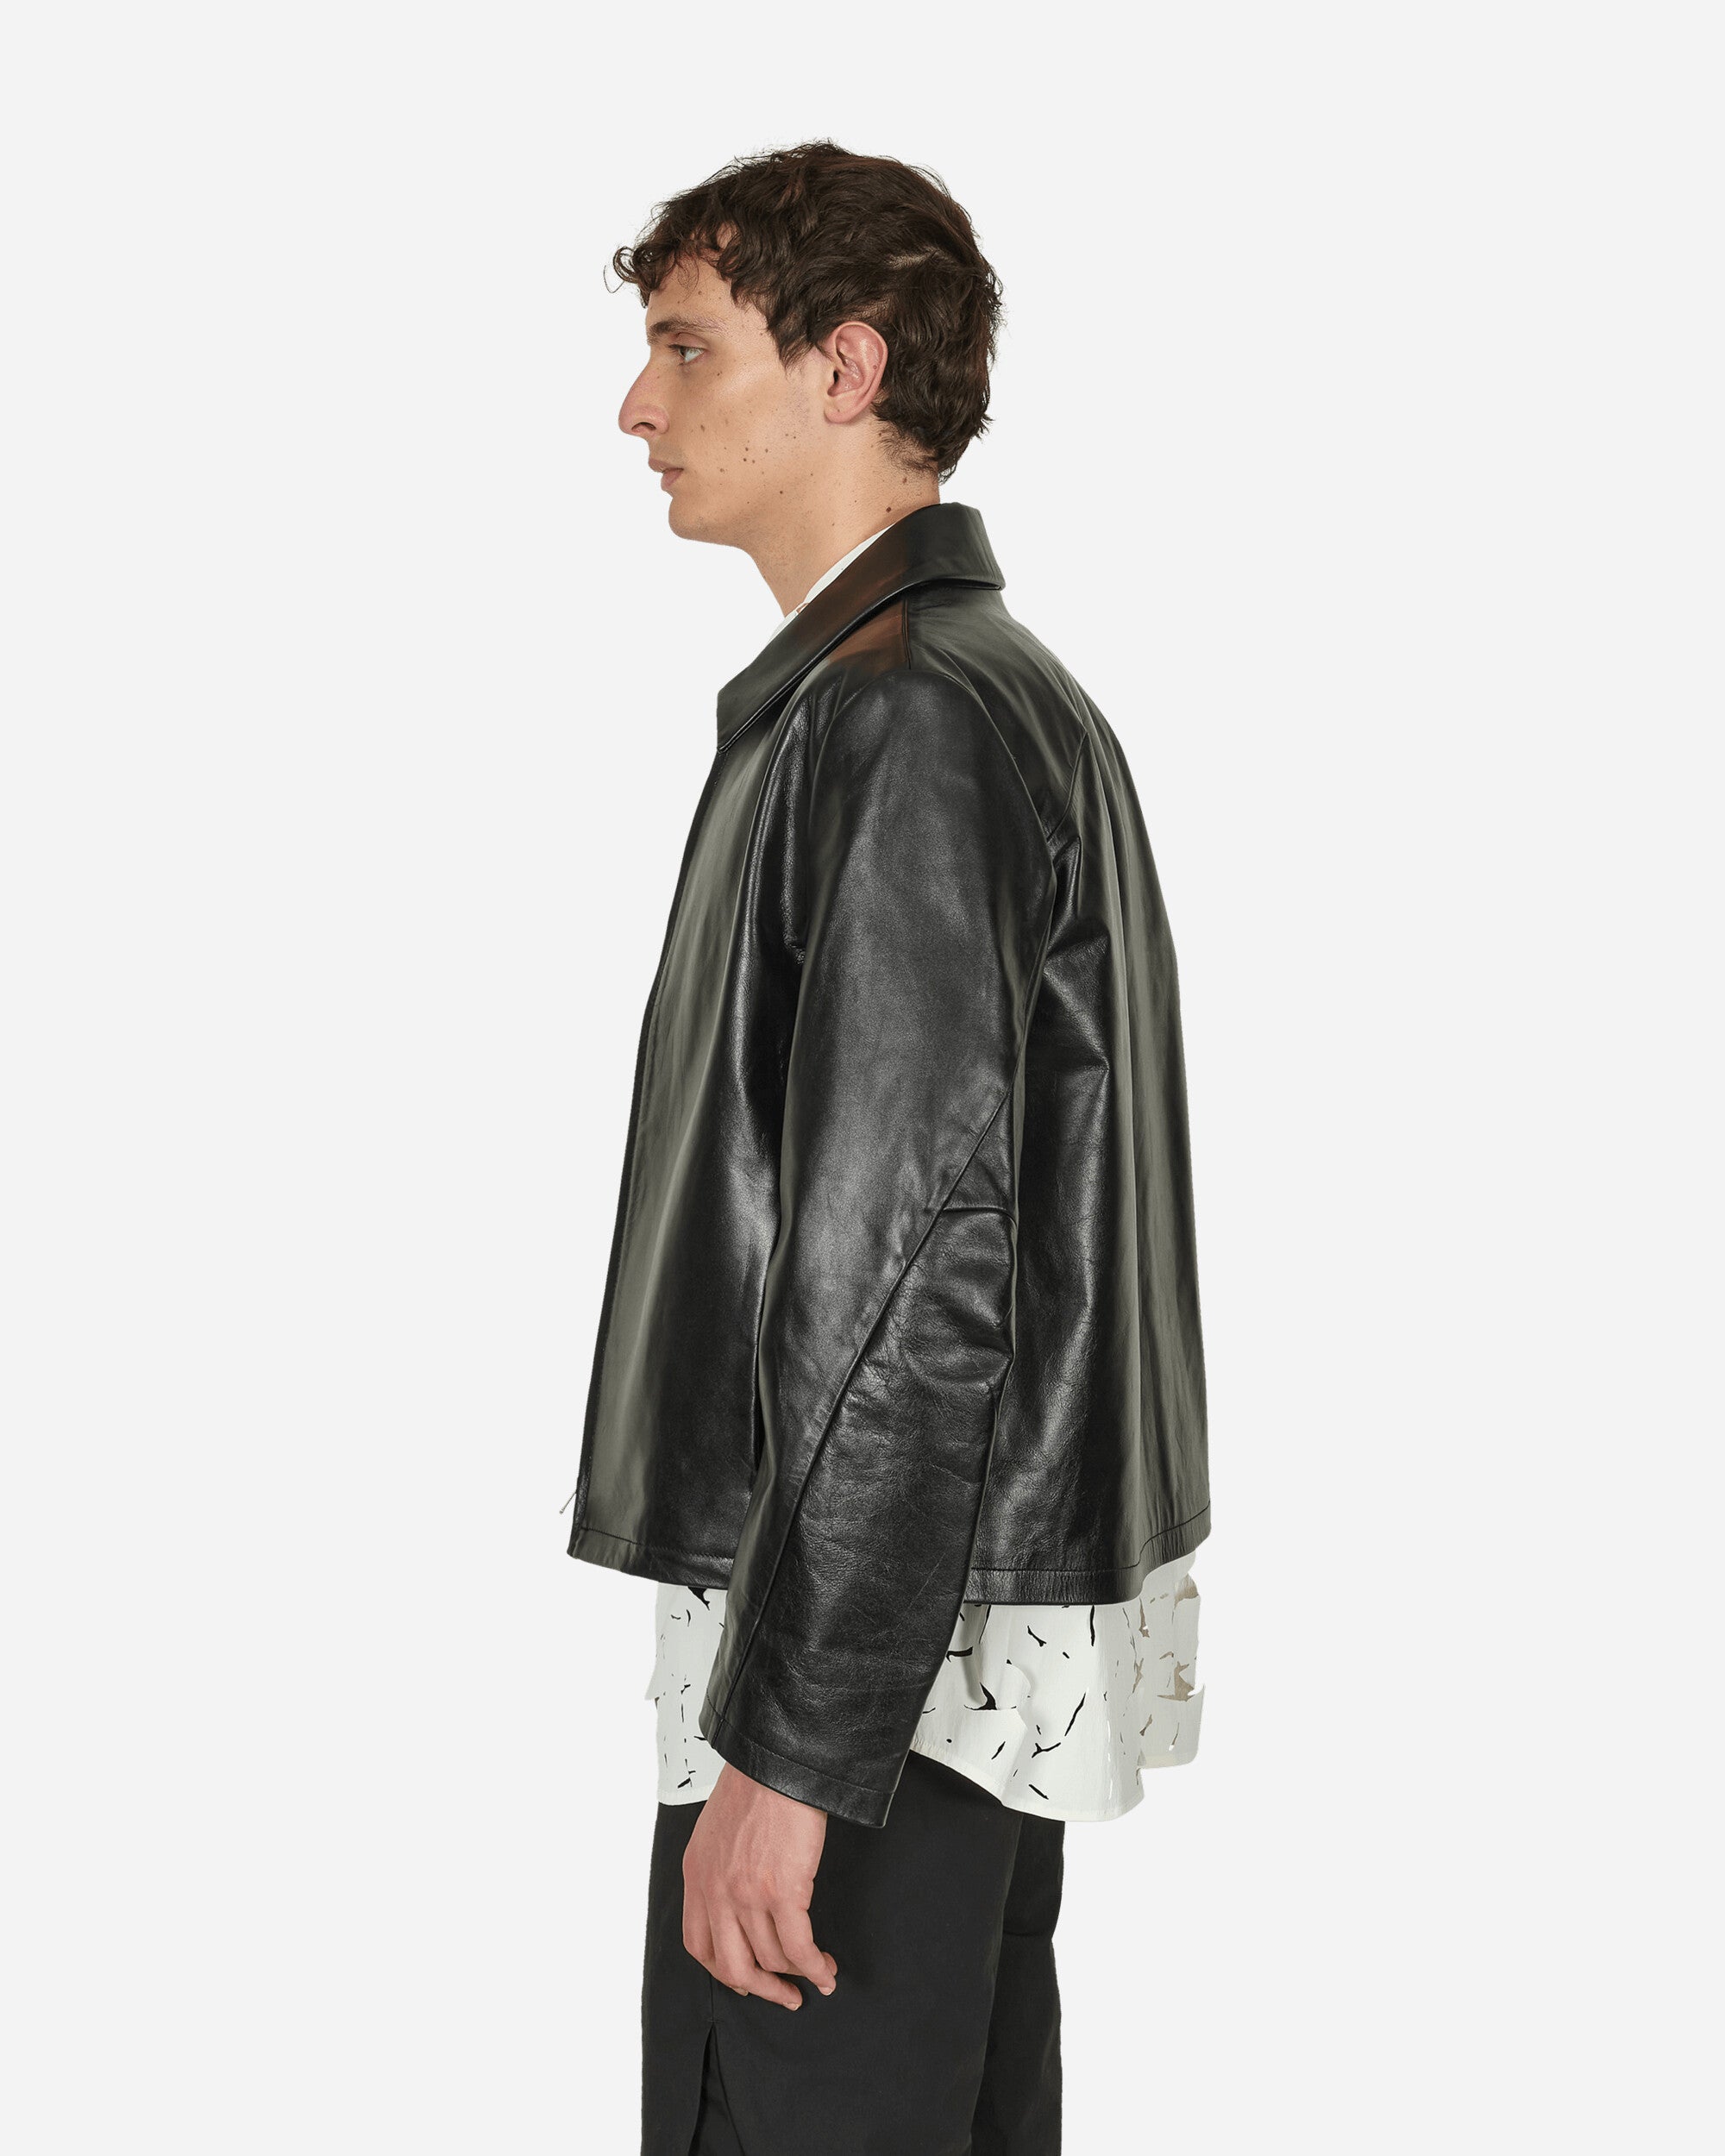 Post Archive Faction (PAF) 6.0 Leather Jacket Right Black Coats and Jackets Leather Jackets 60OLRB BLACK